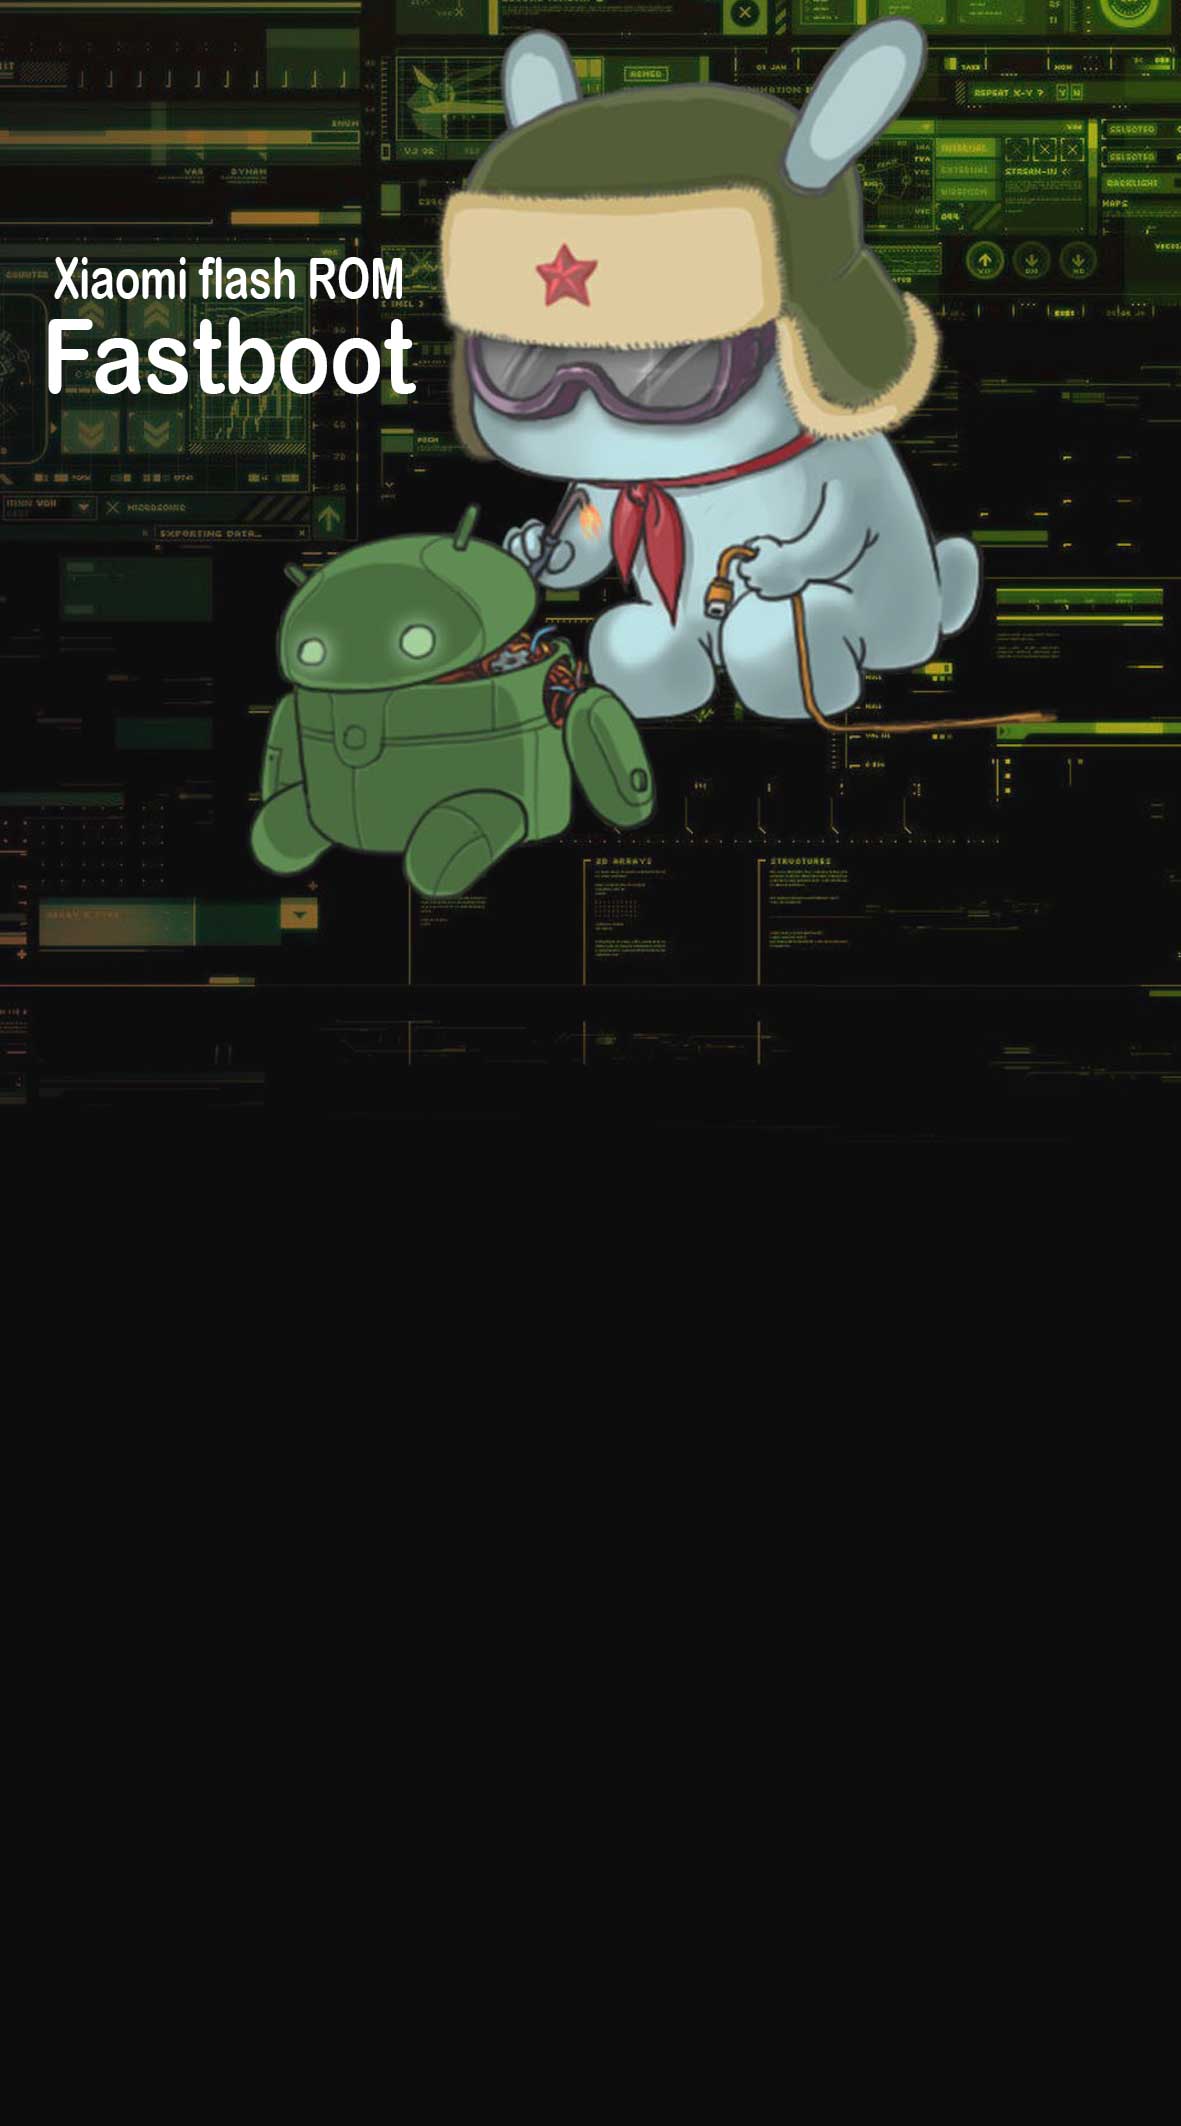 Official Xiaomi Flash ROM via Fastboot